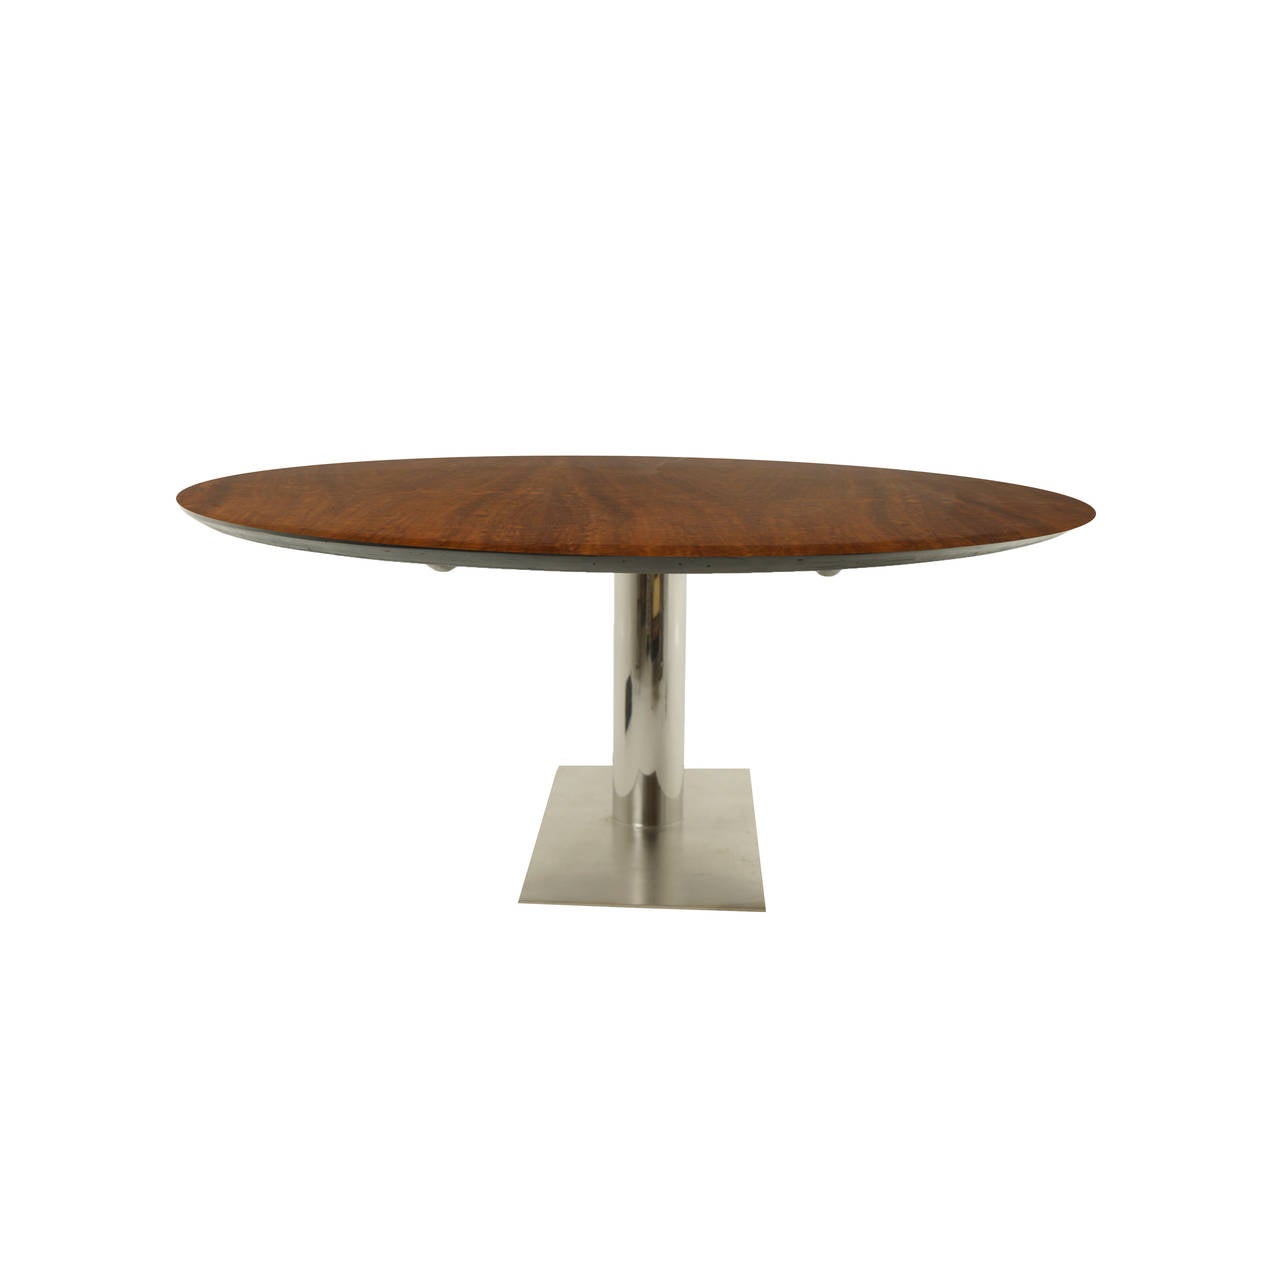 Mid-20th Century Brazilian Oval Imbuia Wood Dining Table with Stainless Base For Sale